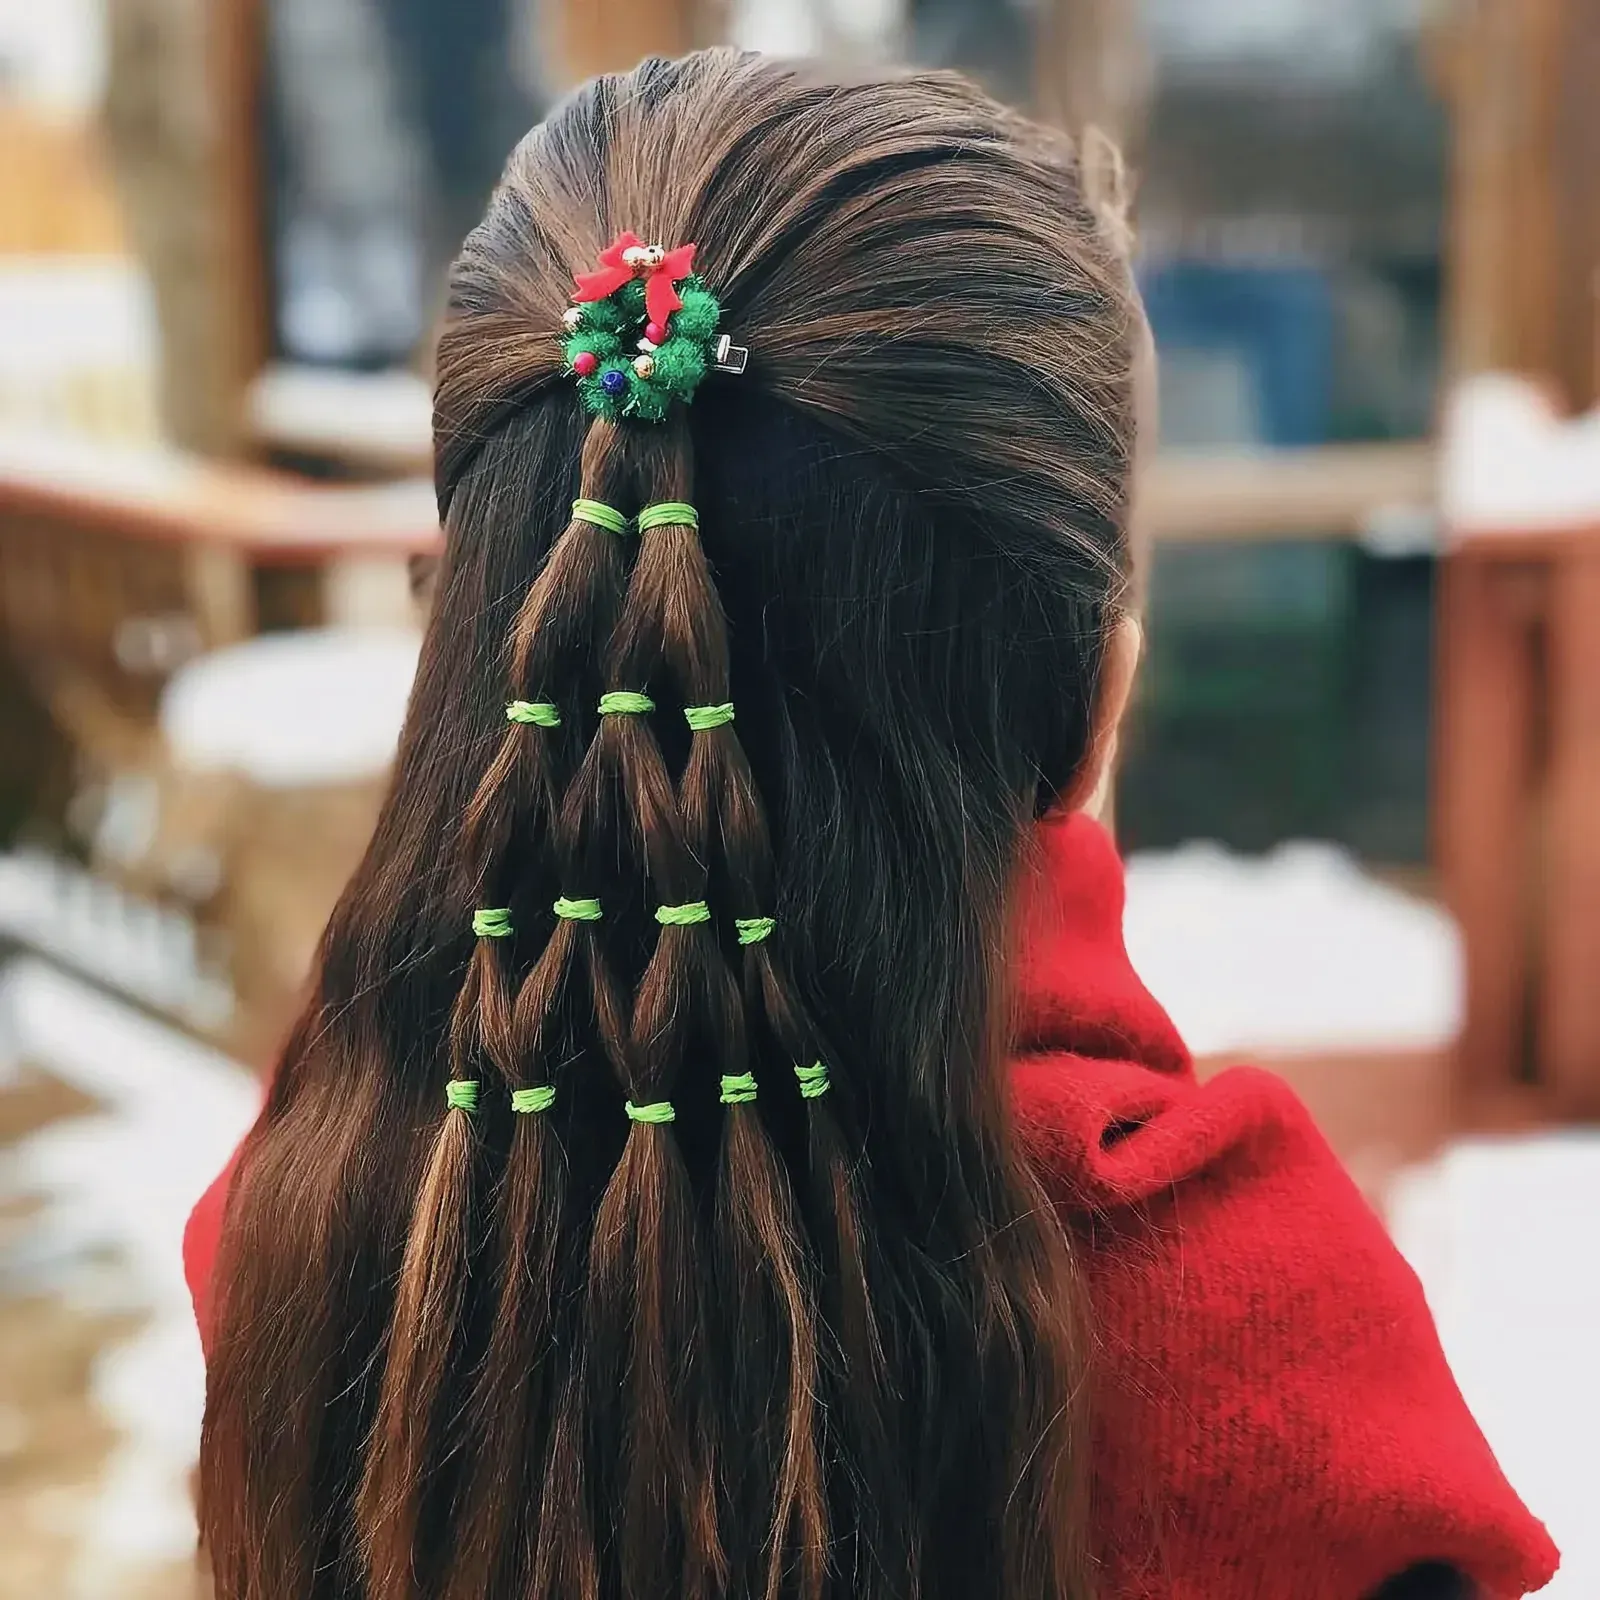 Young girl with a festive Christmas hairstyle